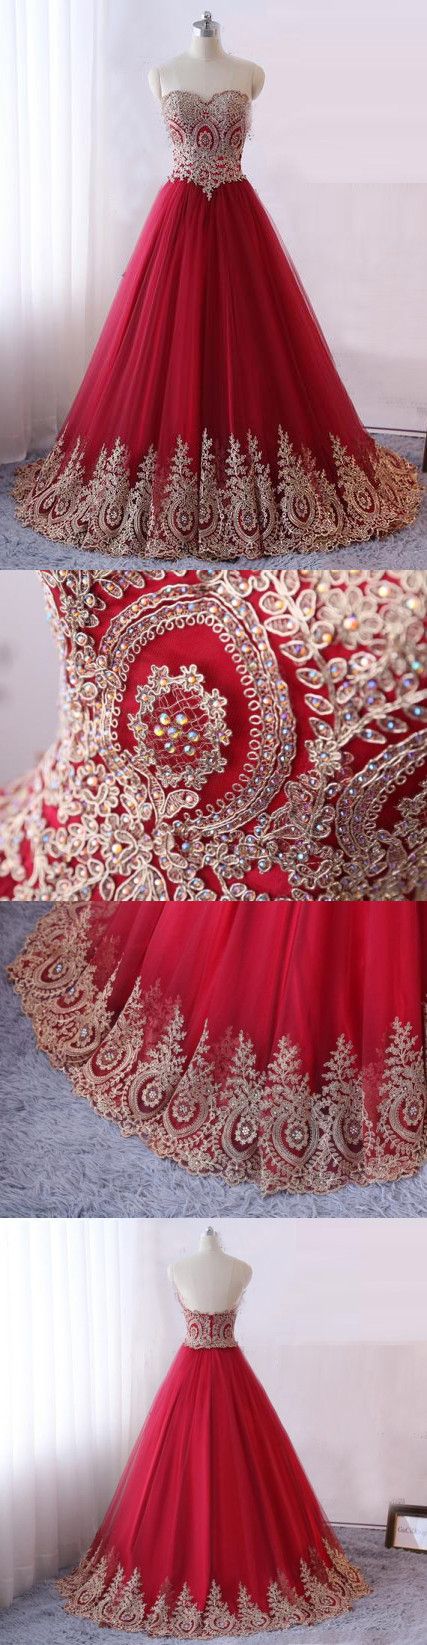 Prom Dress Red Tulle Gold Lace Appliqued Formal Evening Dress ,custom Made Women Party Gowns